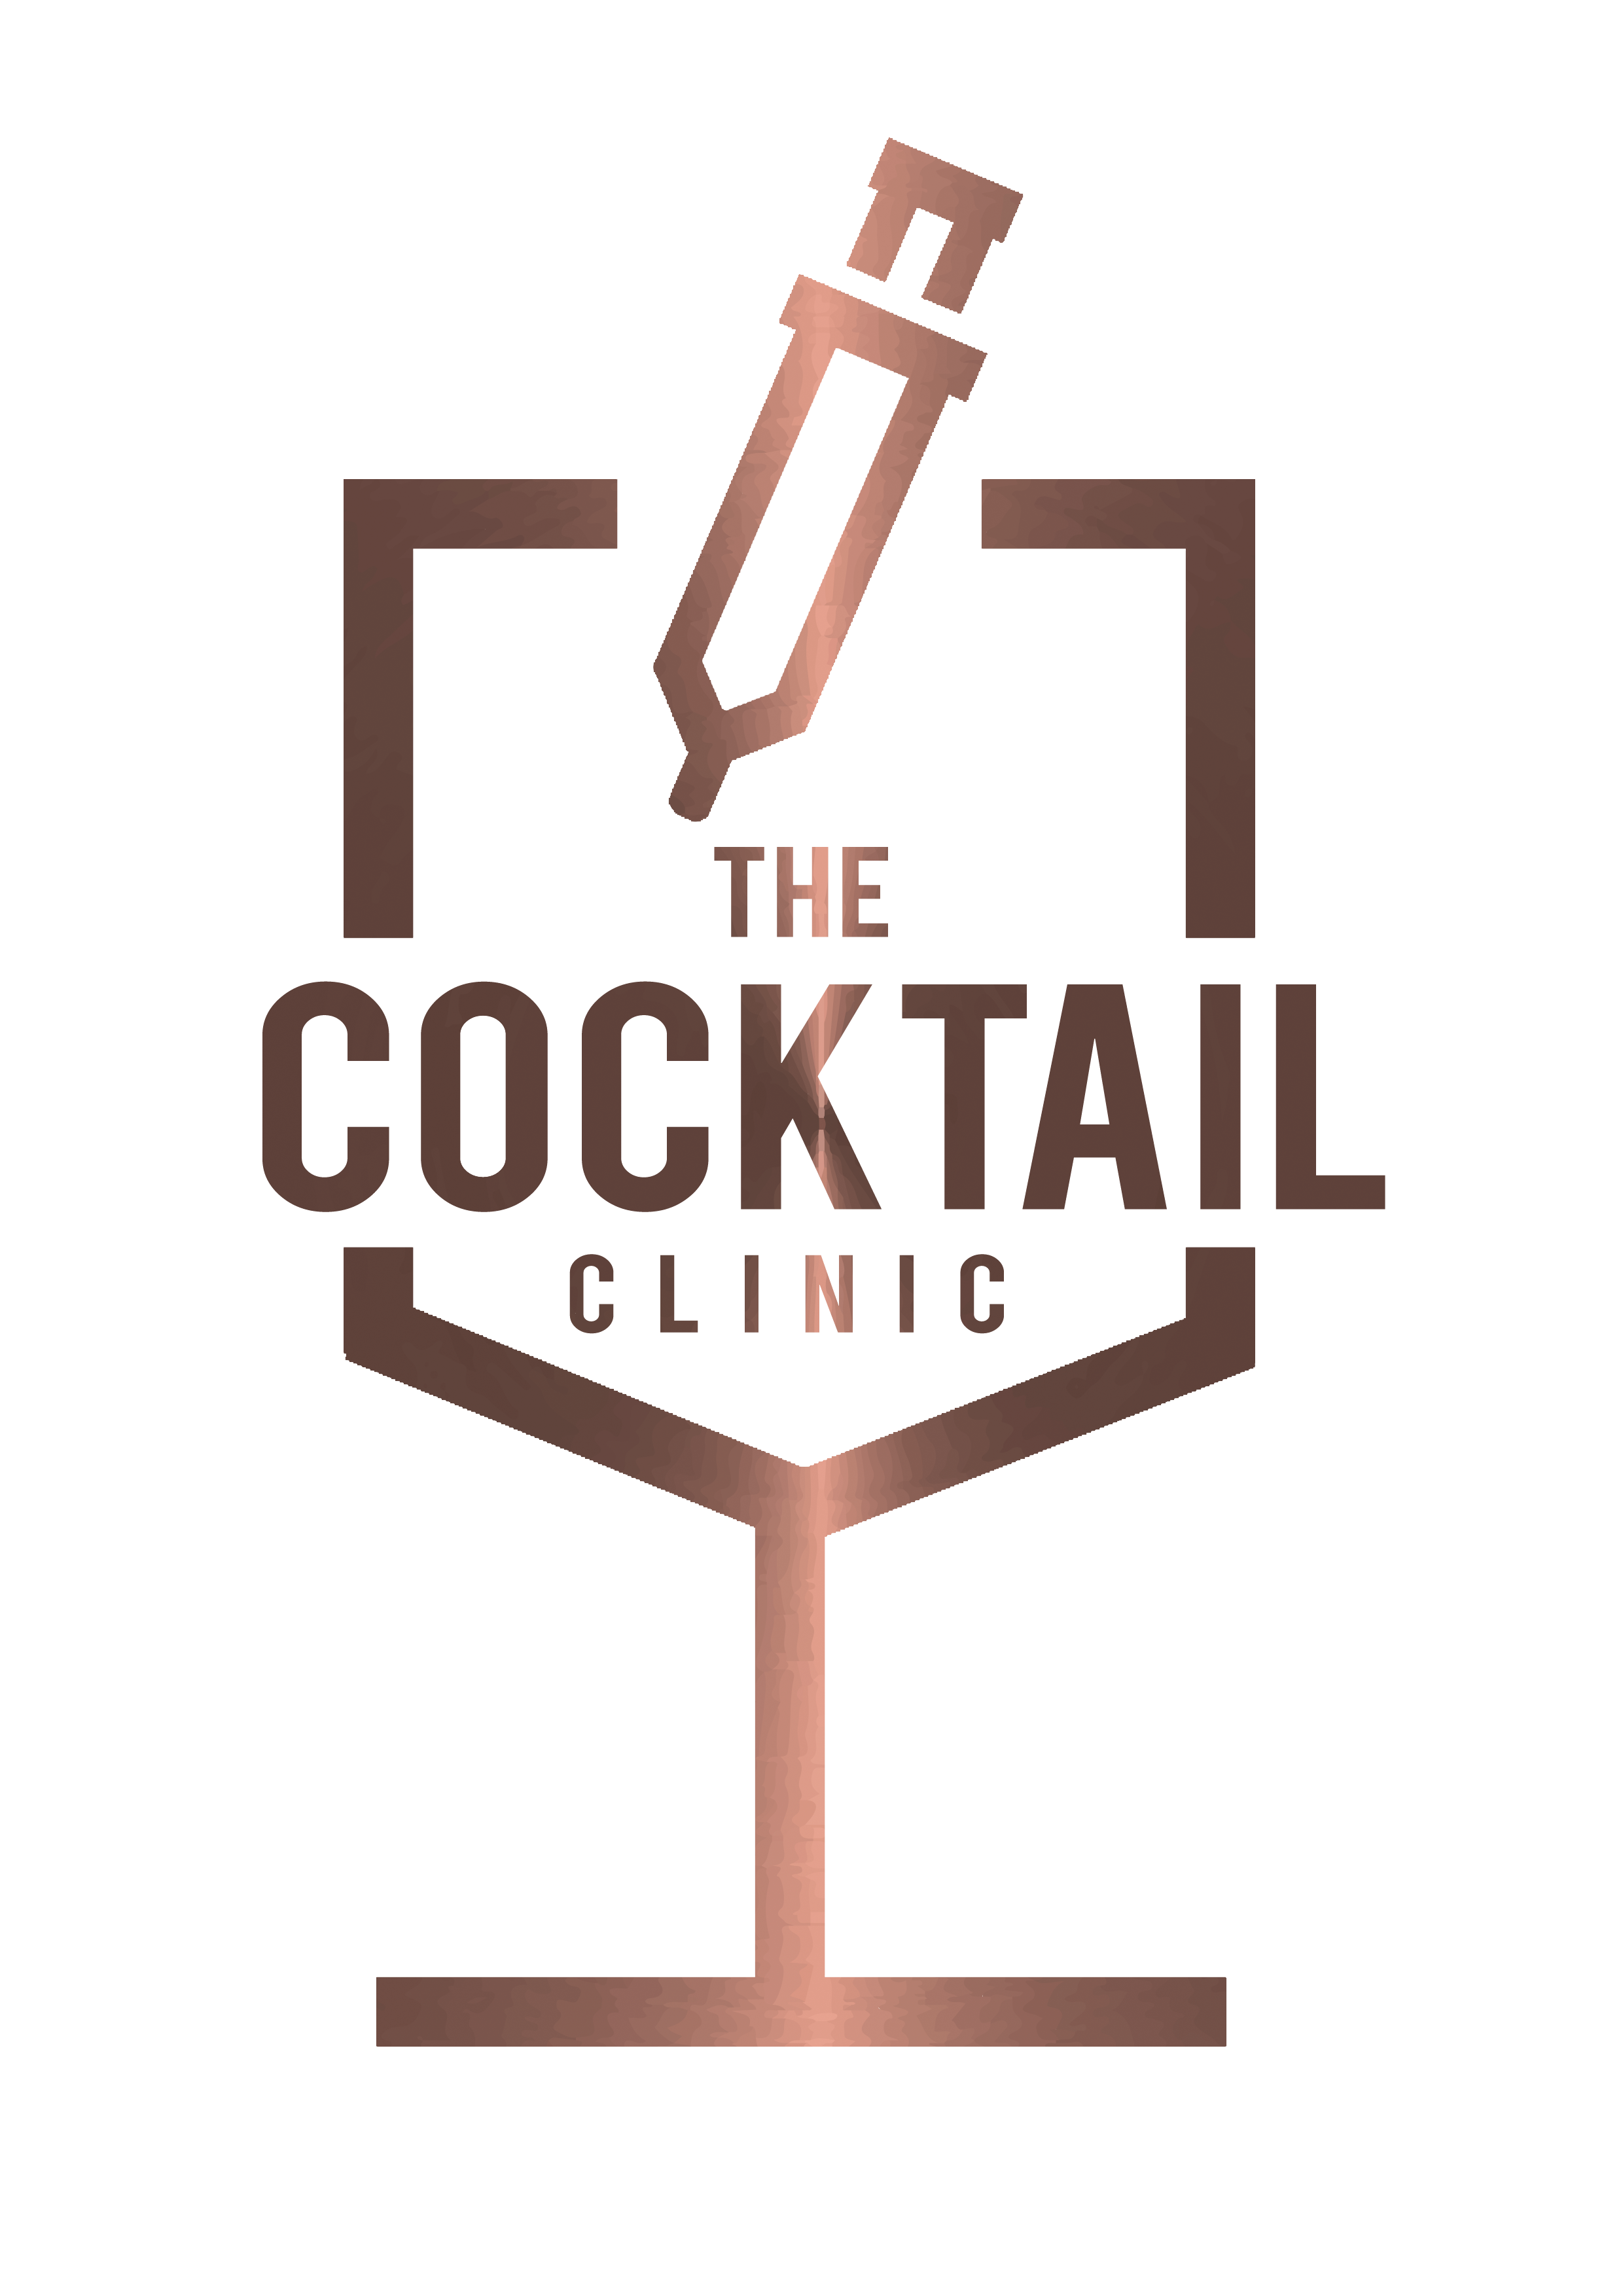 The Cocktail Clinic